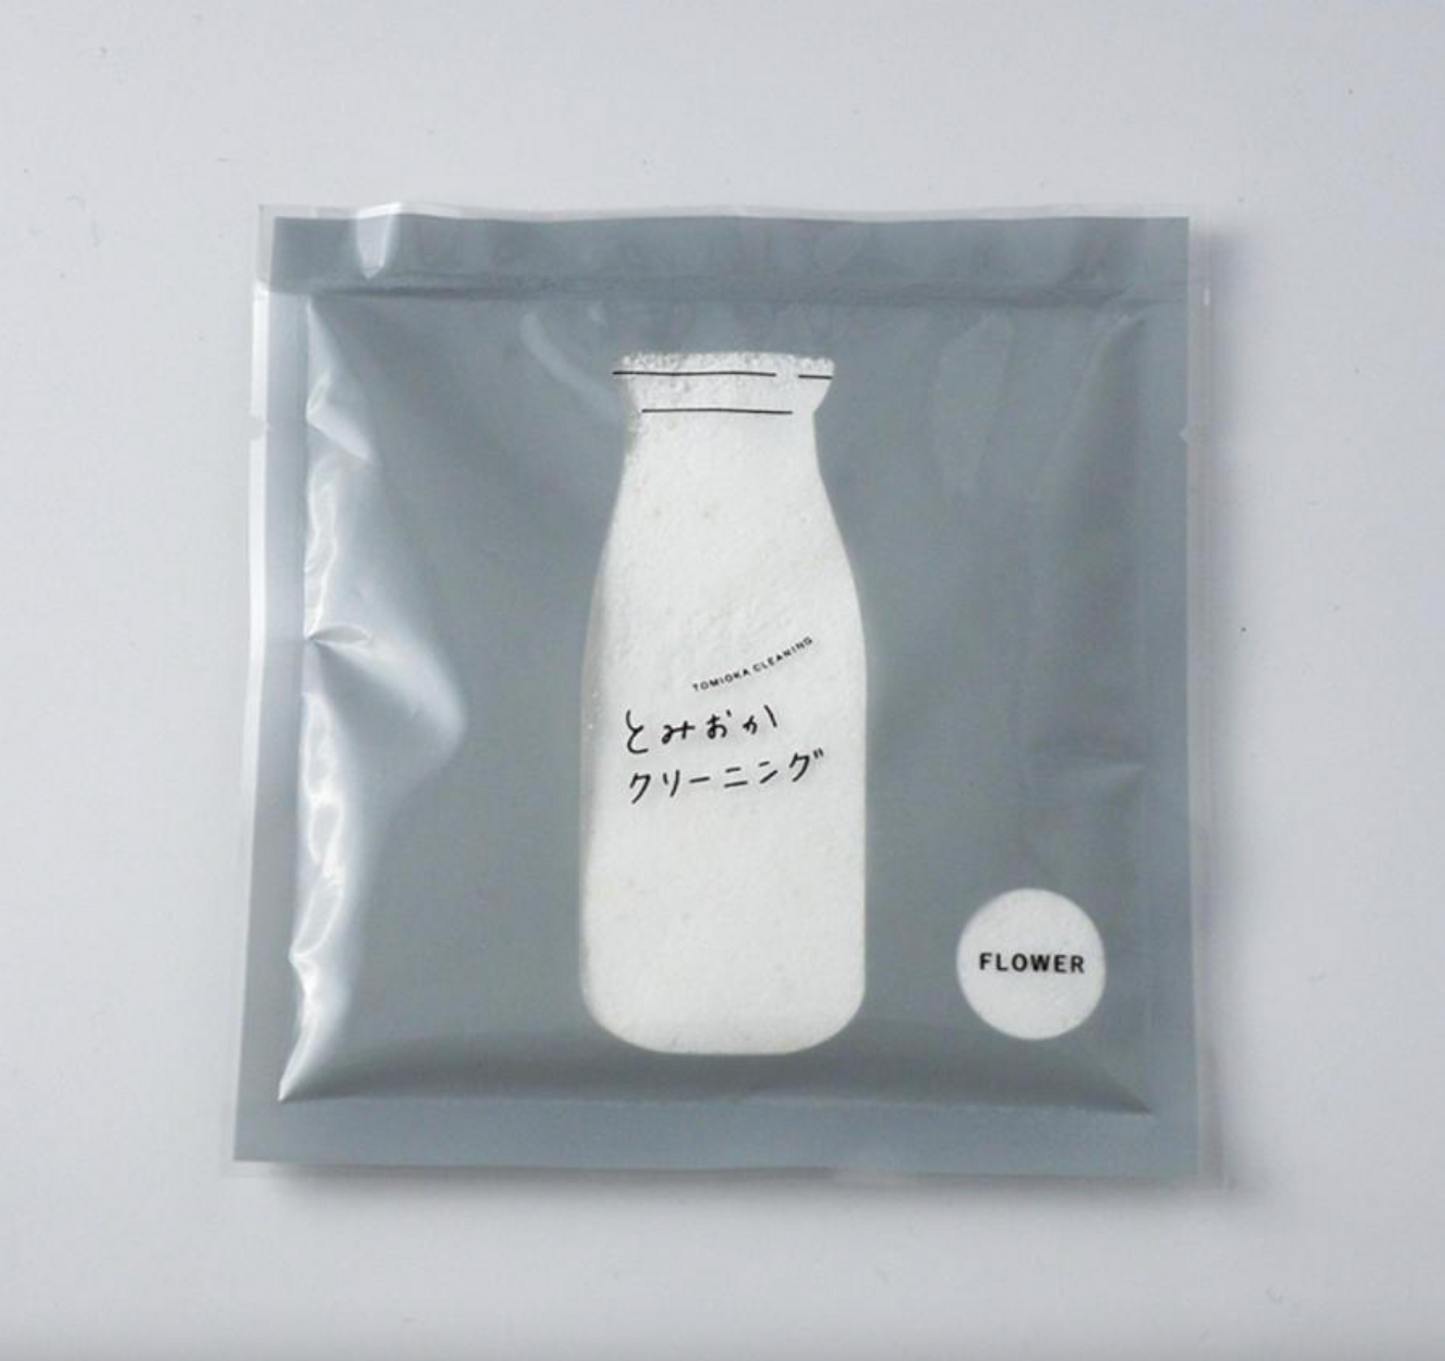 Japan Tomioka Milk Can Laundry Detergent (Small Pack)